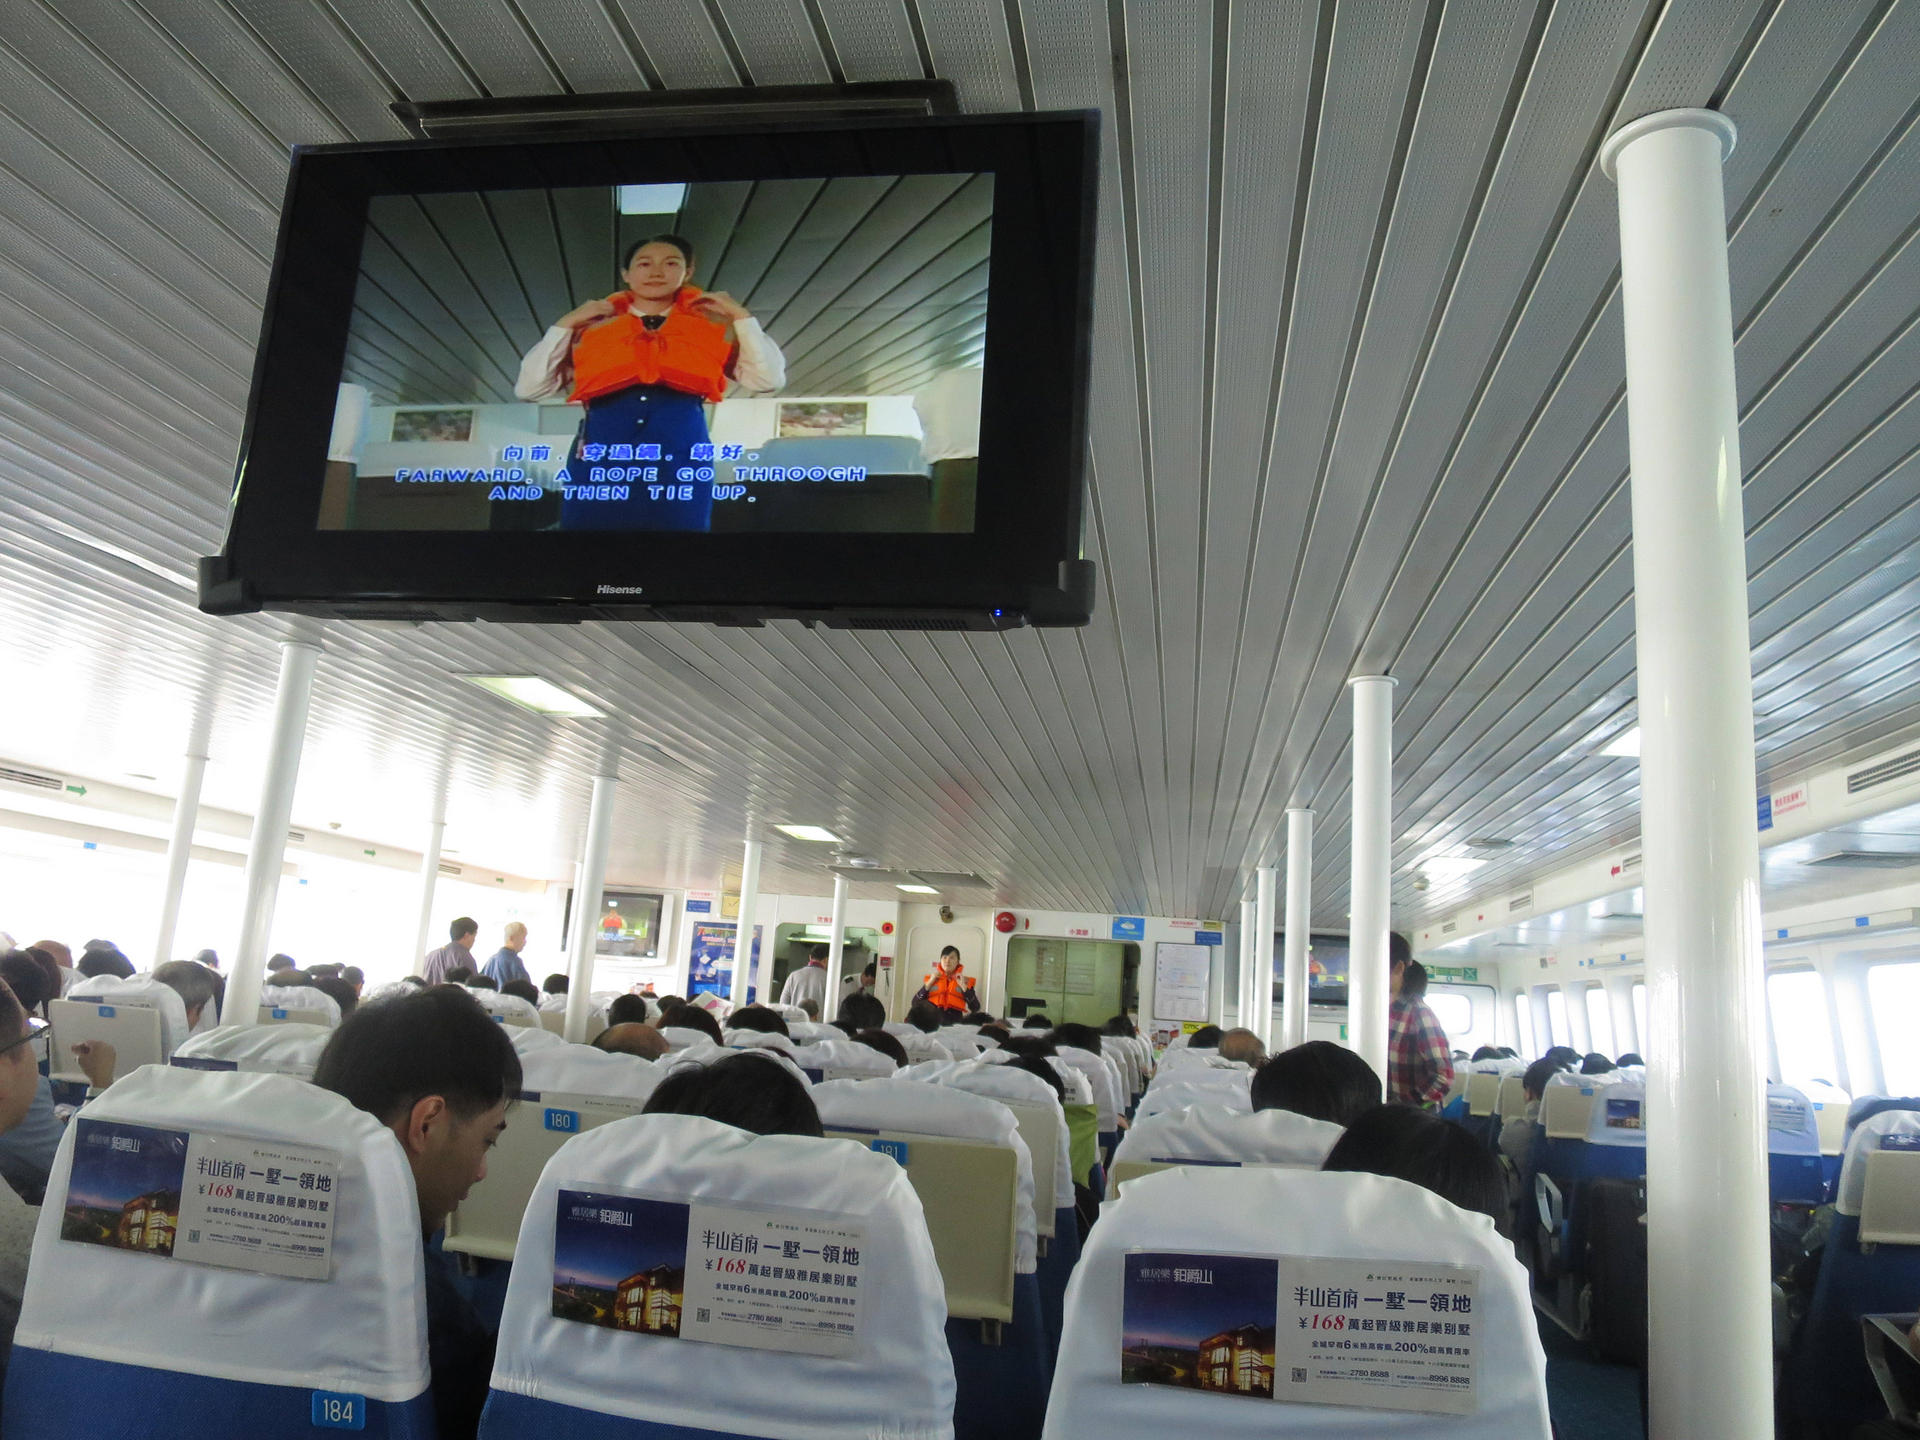 Eat, drink and be ferried: a 90-minute ride from Hong Kong to Zhongshan totally floats these passengers' boats.